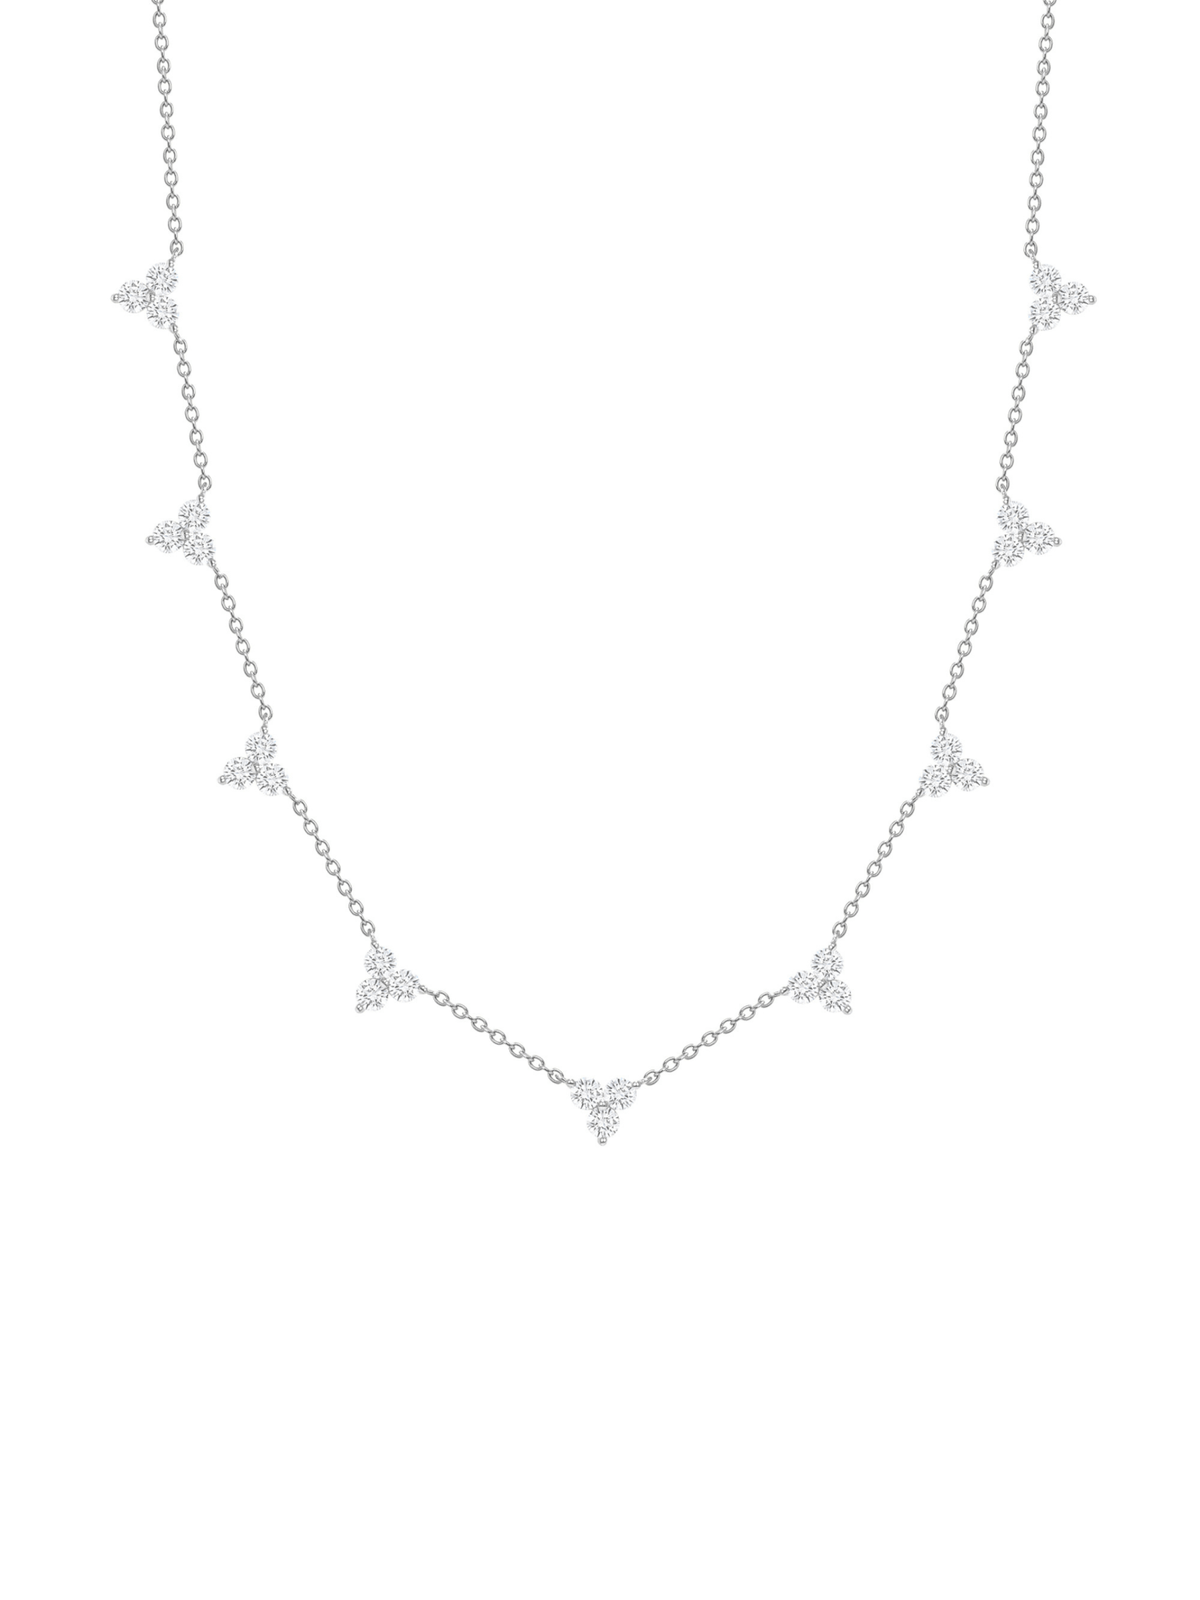 14K white gold diamond cluster necklace on a white background